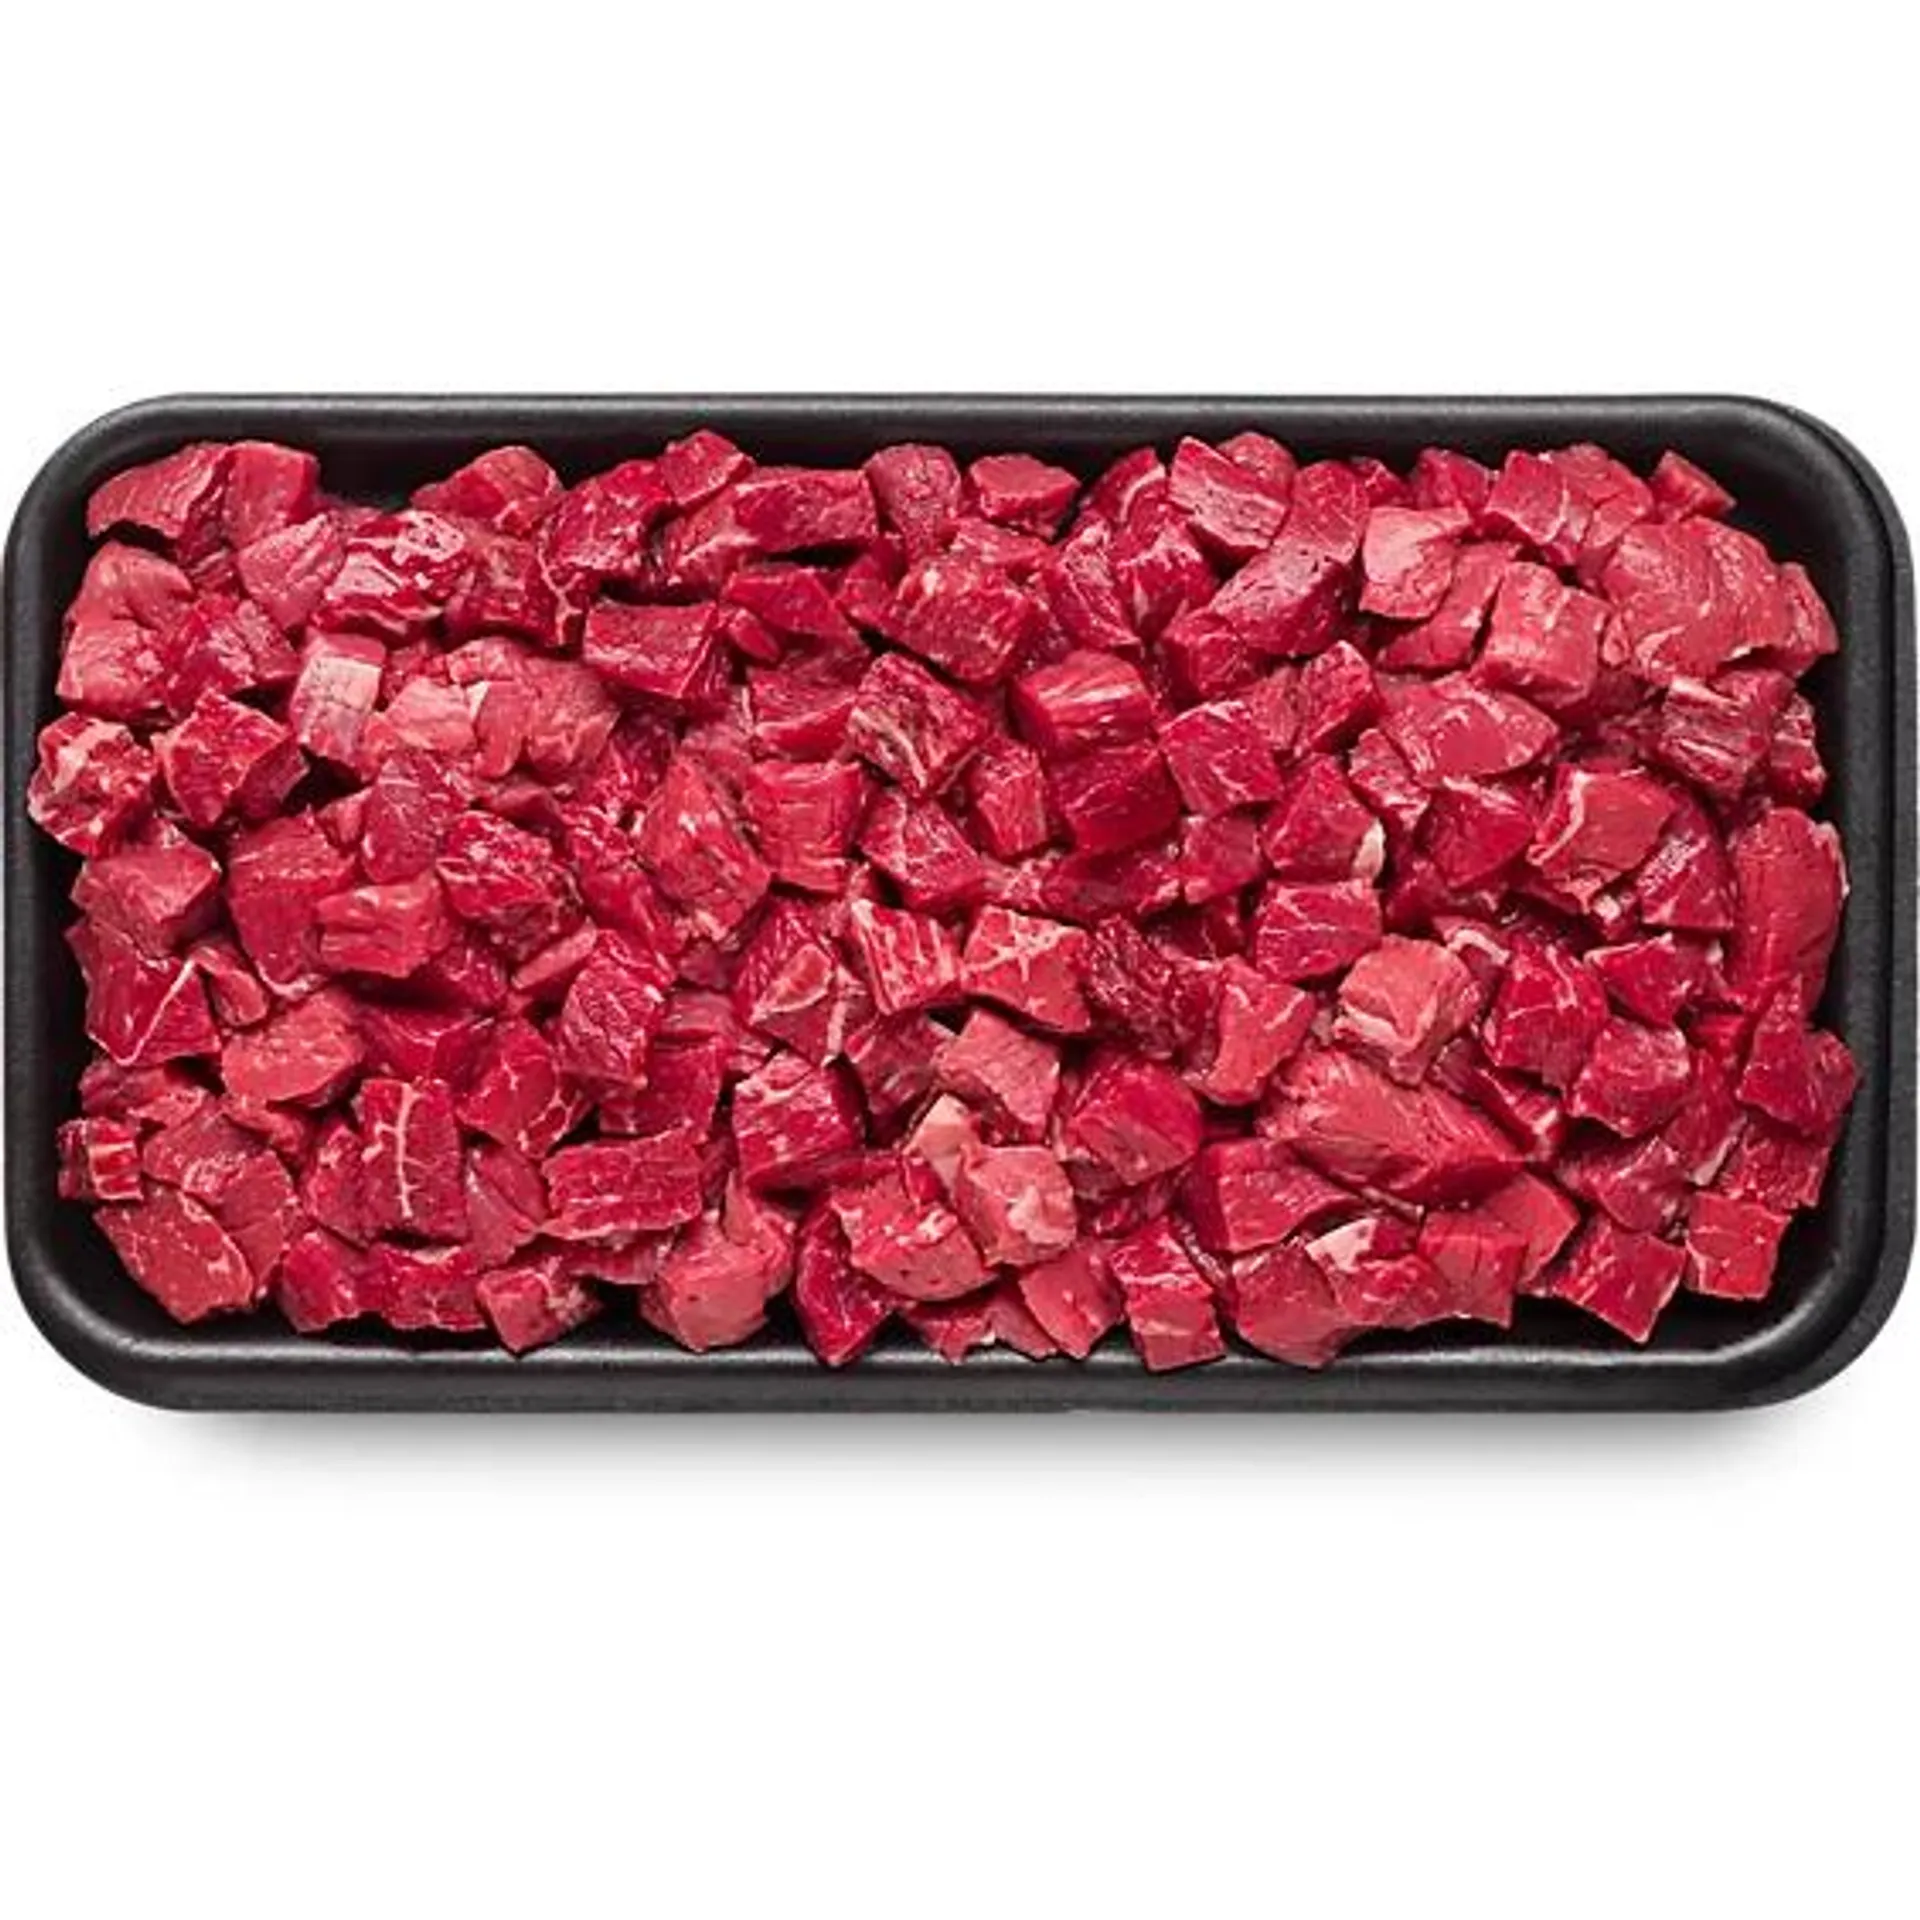 USDA Choice Beef For Stew Value Pack - 3.50 Lbs.